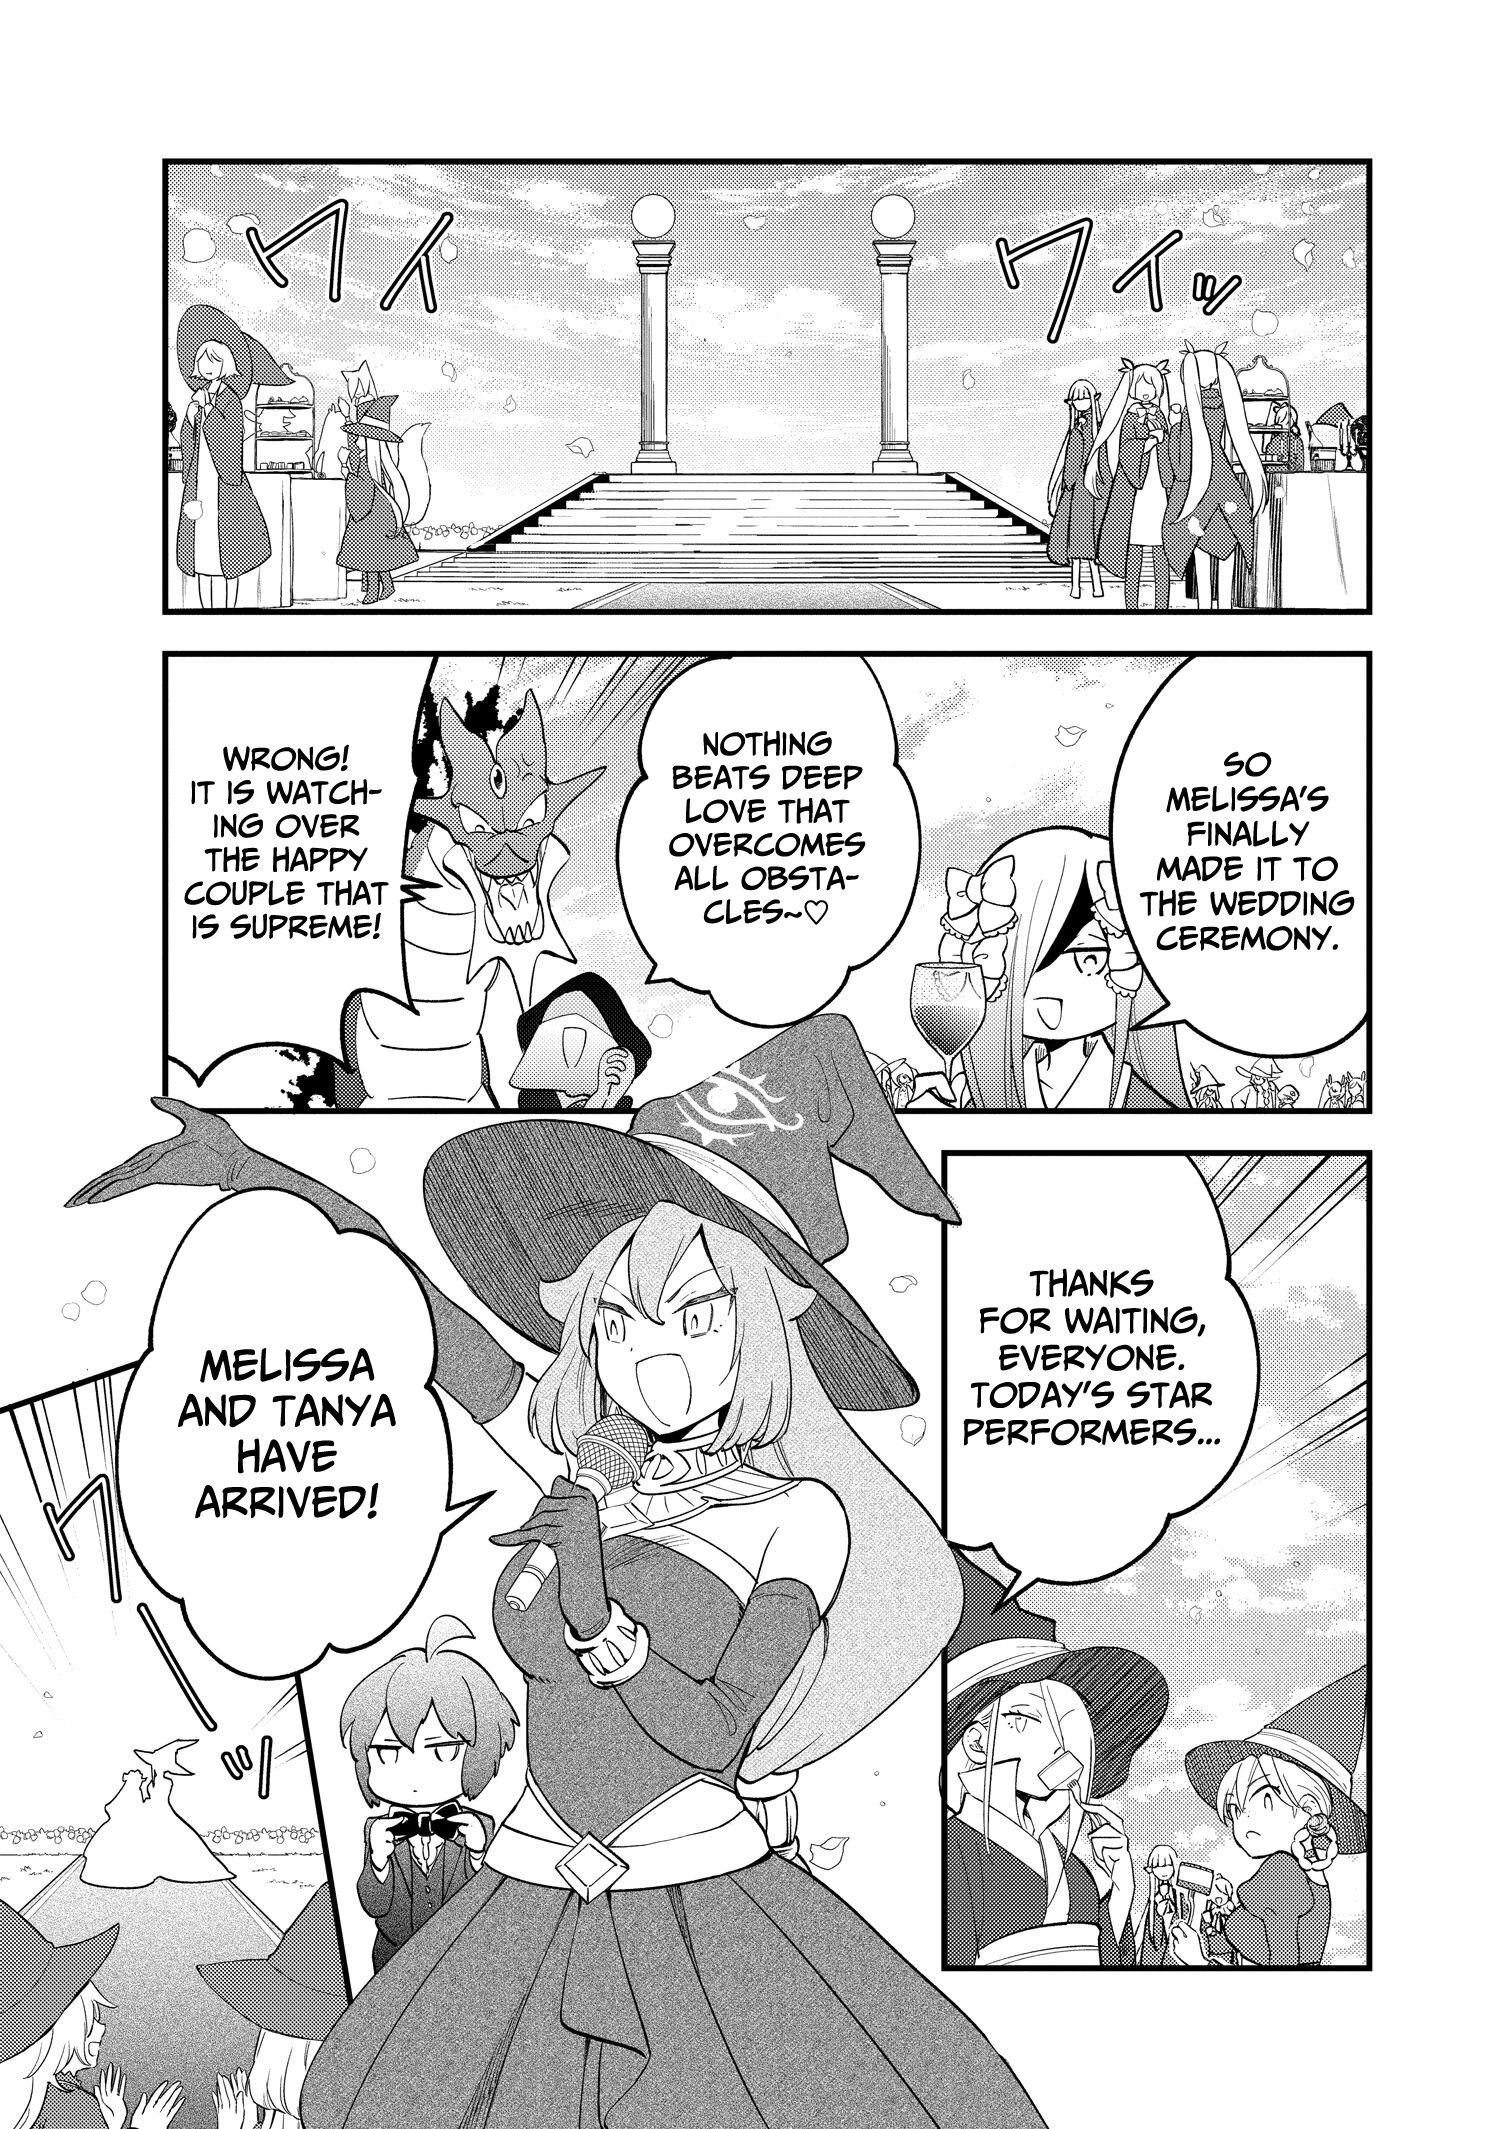 The Witch's Marriage - Page 1